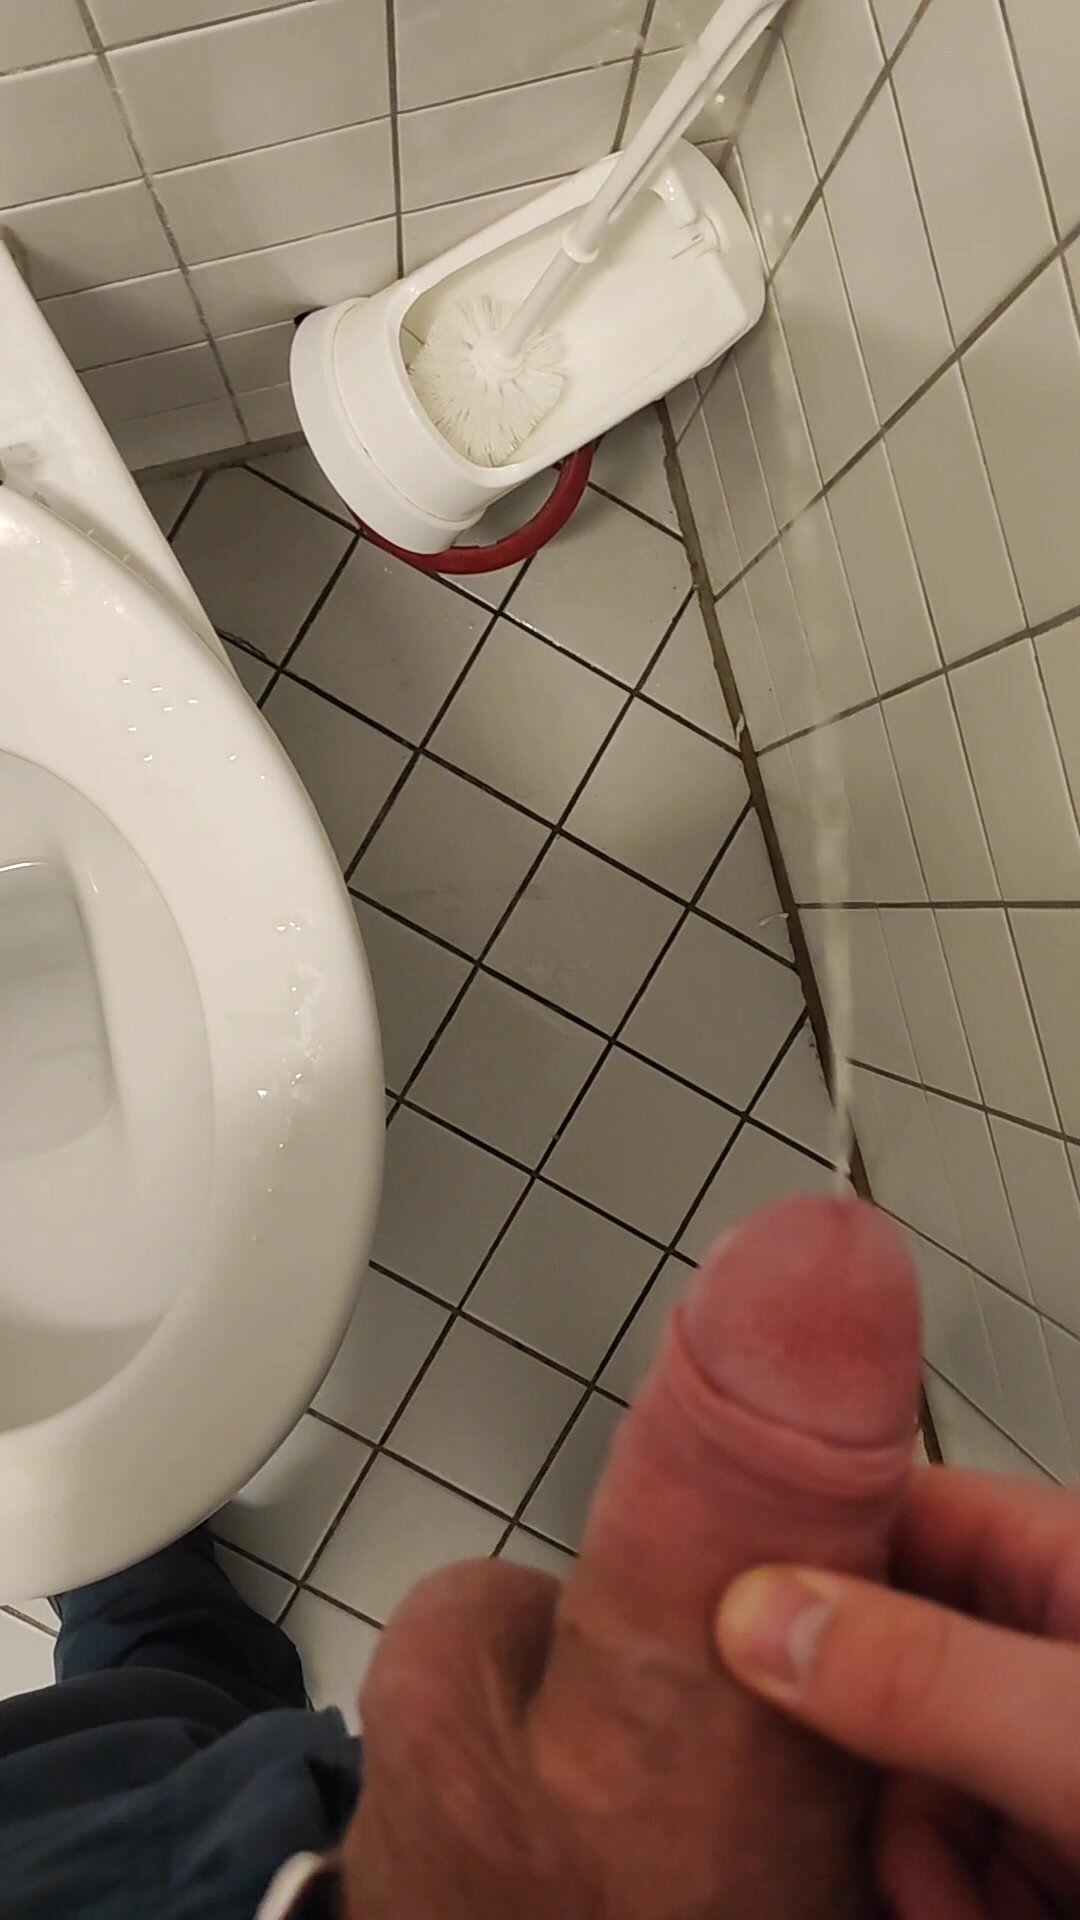 First time piss trashing fully public space